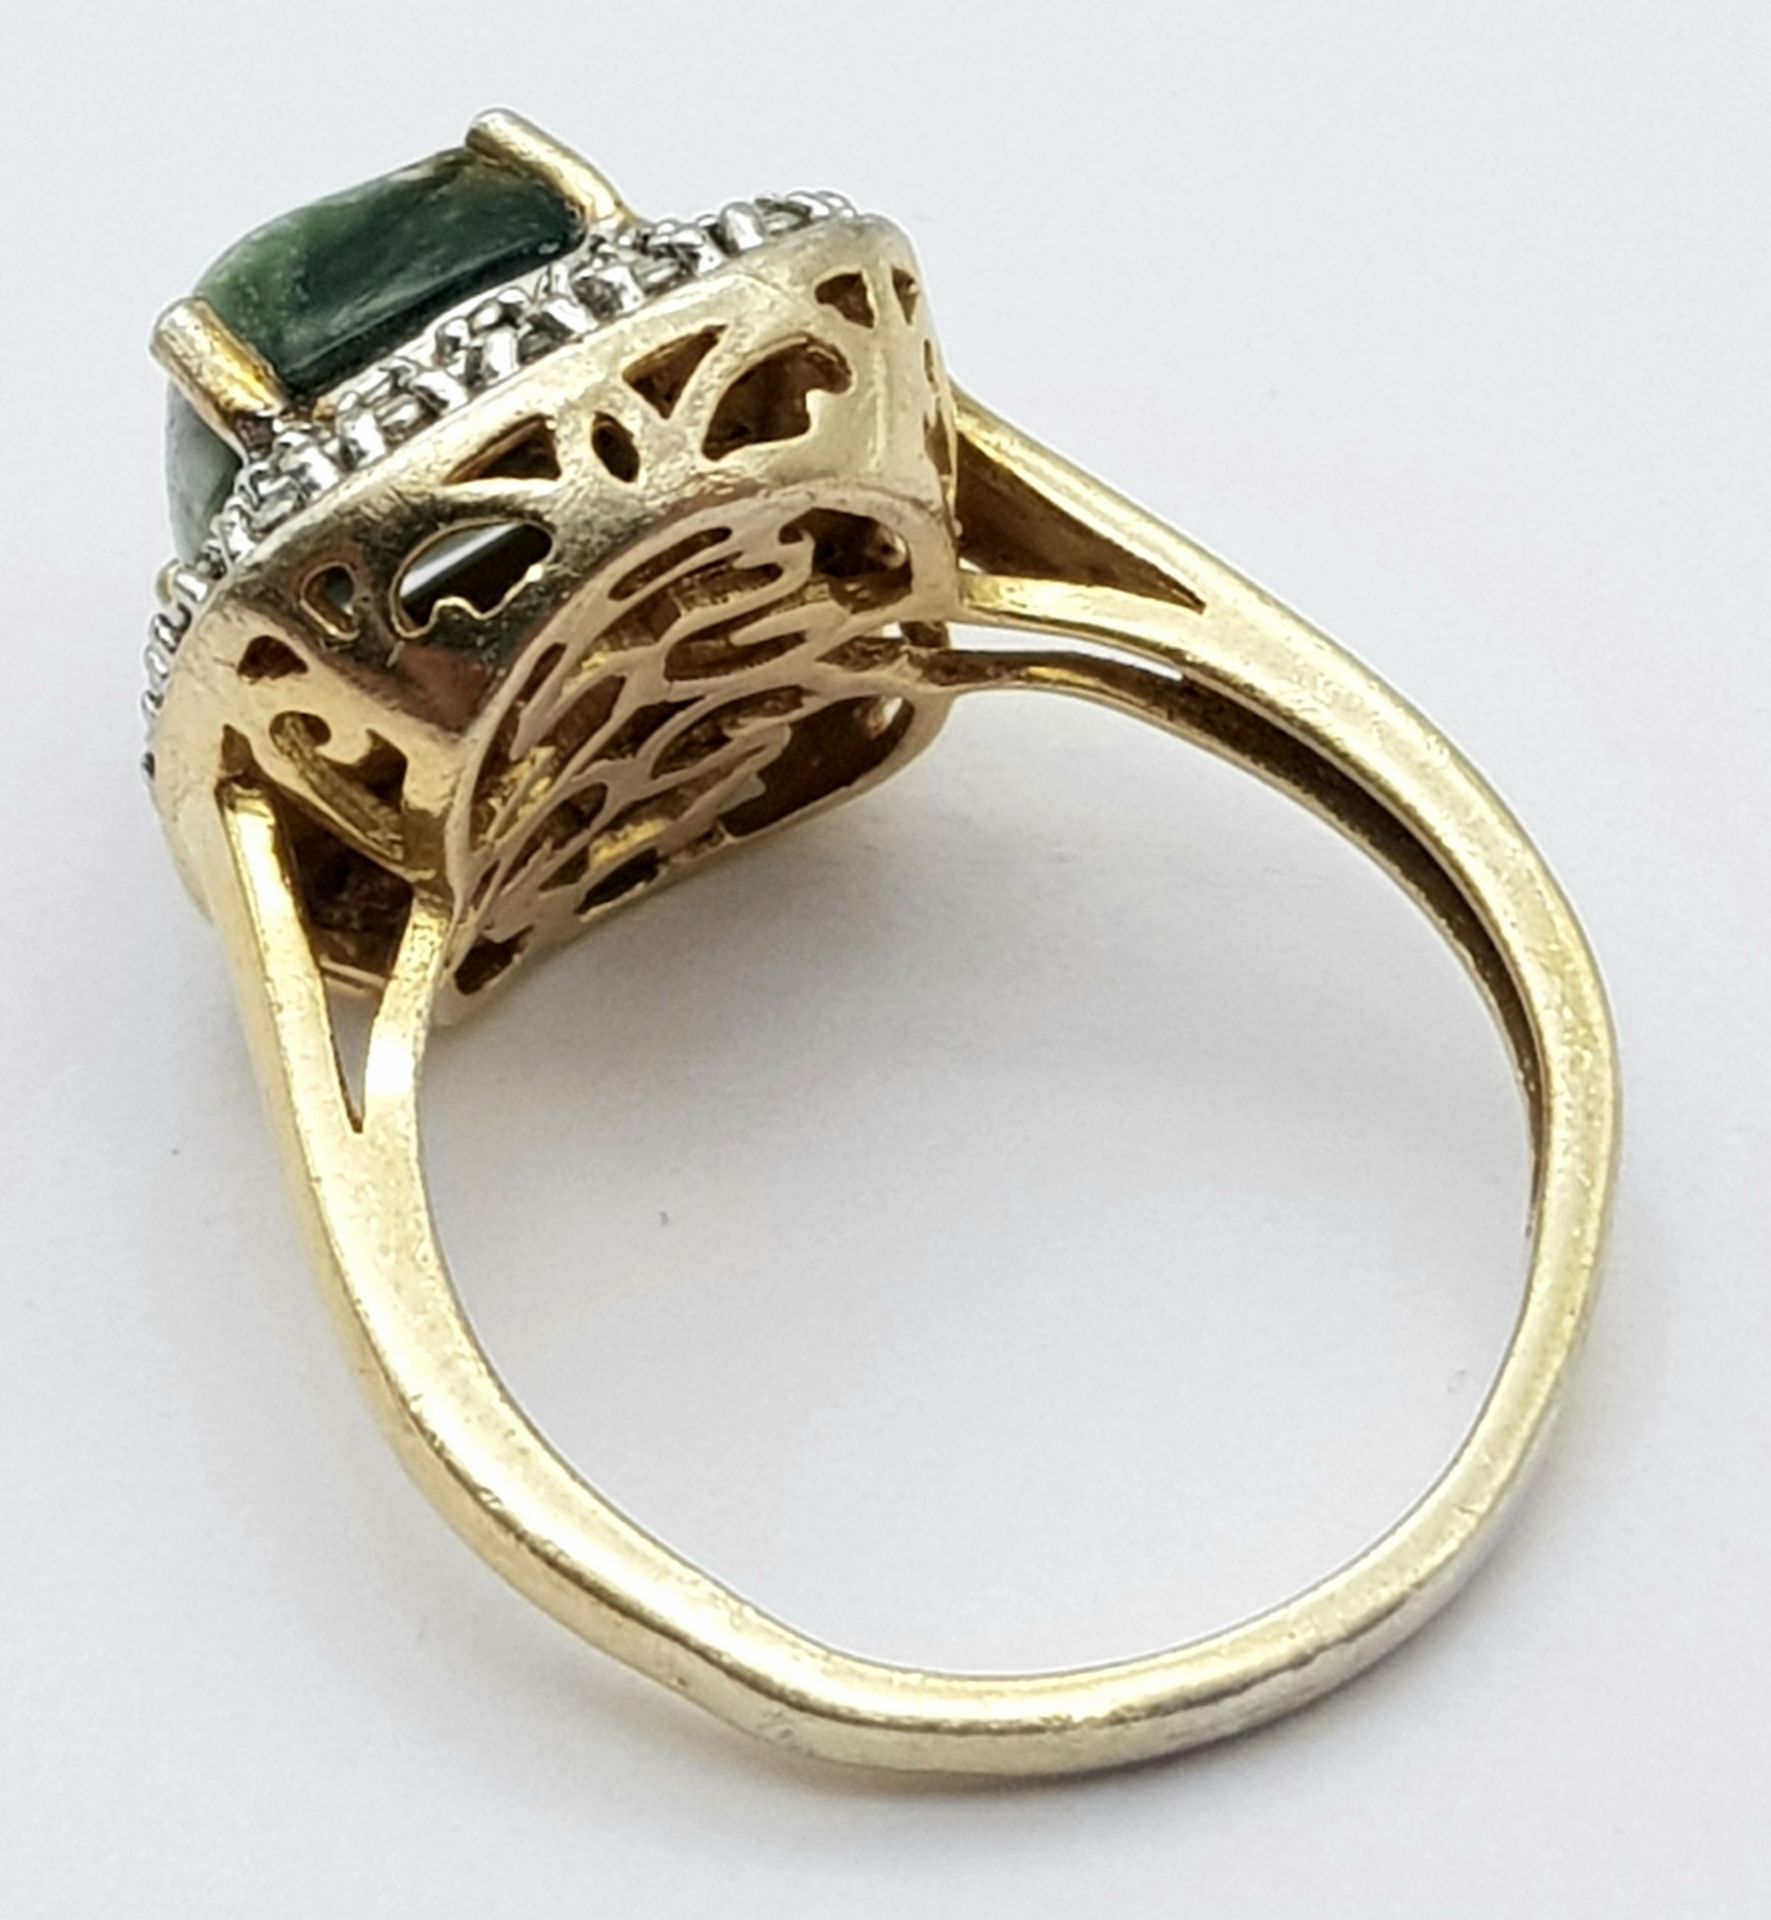 A Vintage Yellow Gold Gilt Sterling Silver Russian Seraphinite and Diamond Tiered Set Ring Size N. - Image 3 of 5